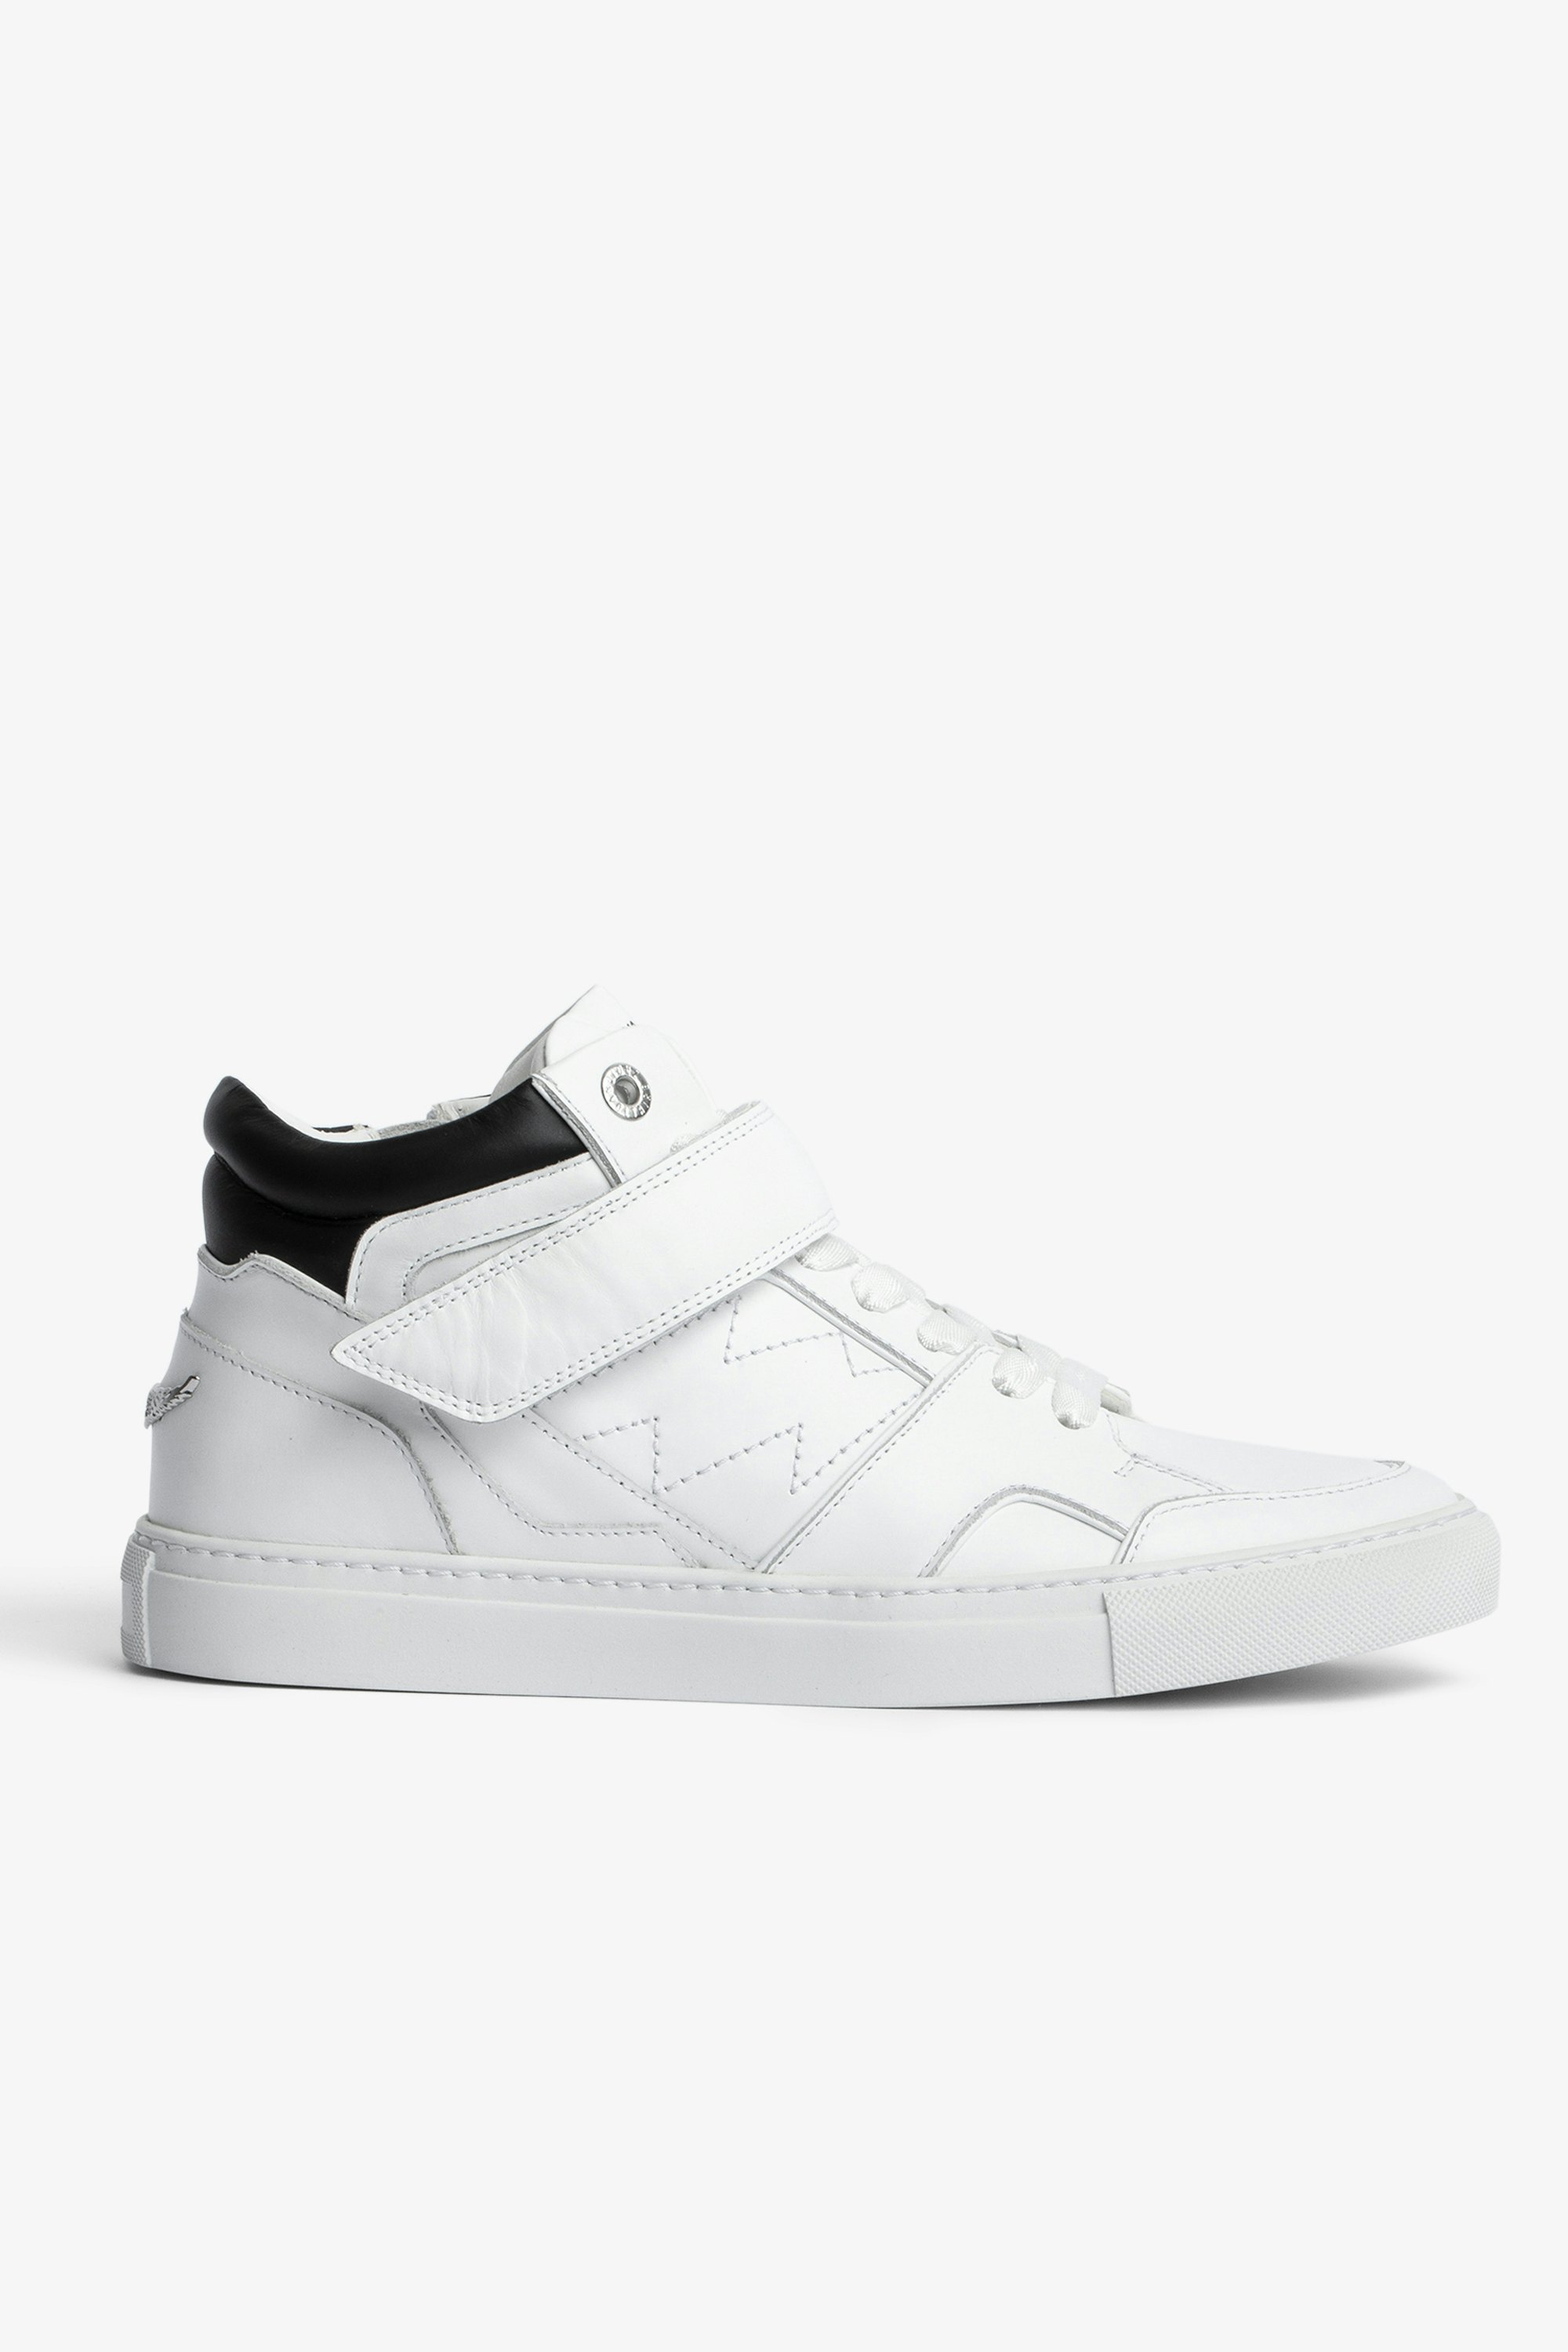 ZV1747 Mid Flash Sneakers Women’s white leather mid-top sneakers